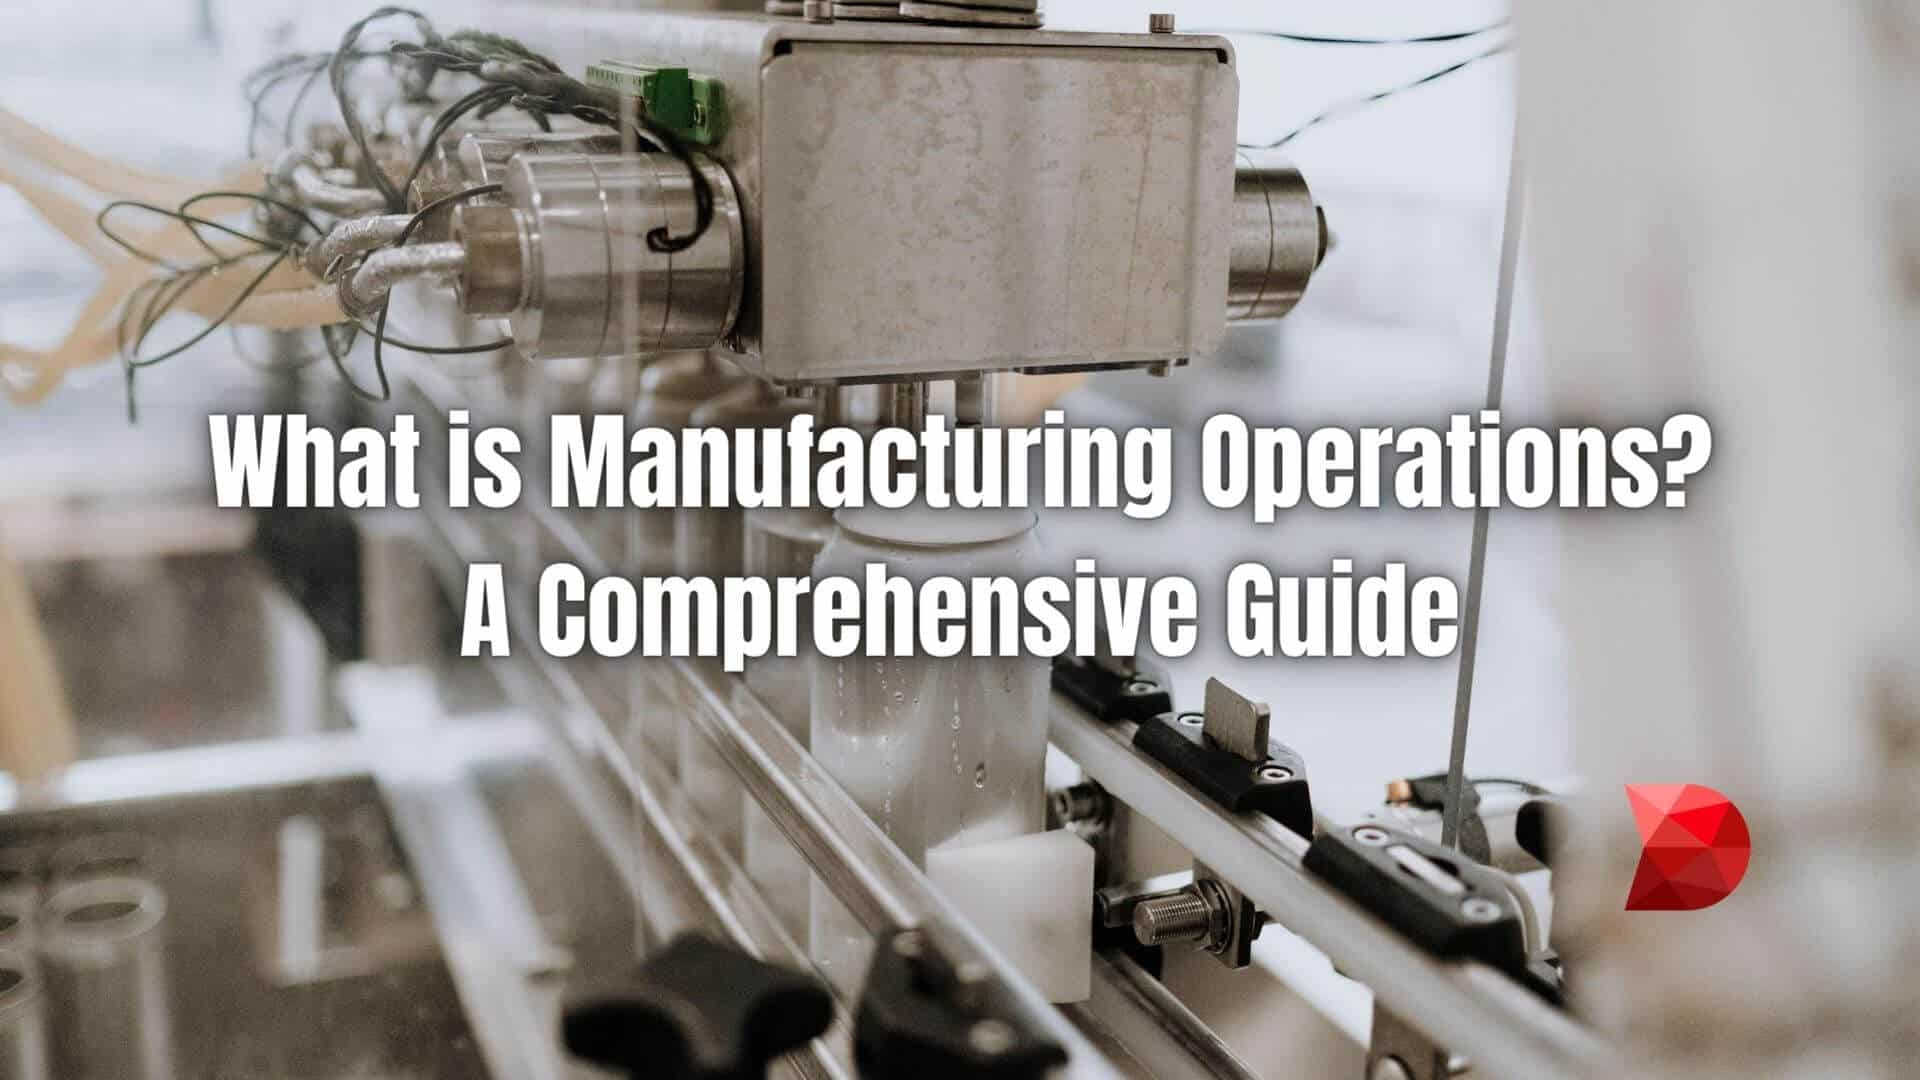 Unlock efficiency in manufacturing operations with our complete guide. Learn essential strategies and tools for optimizing your processes.